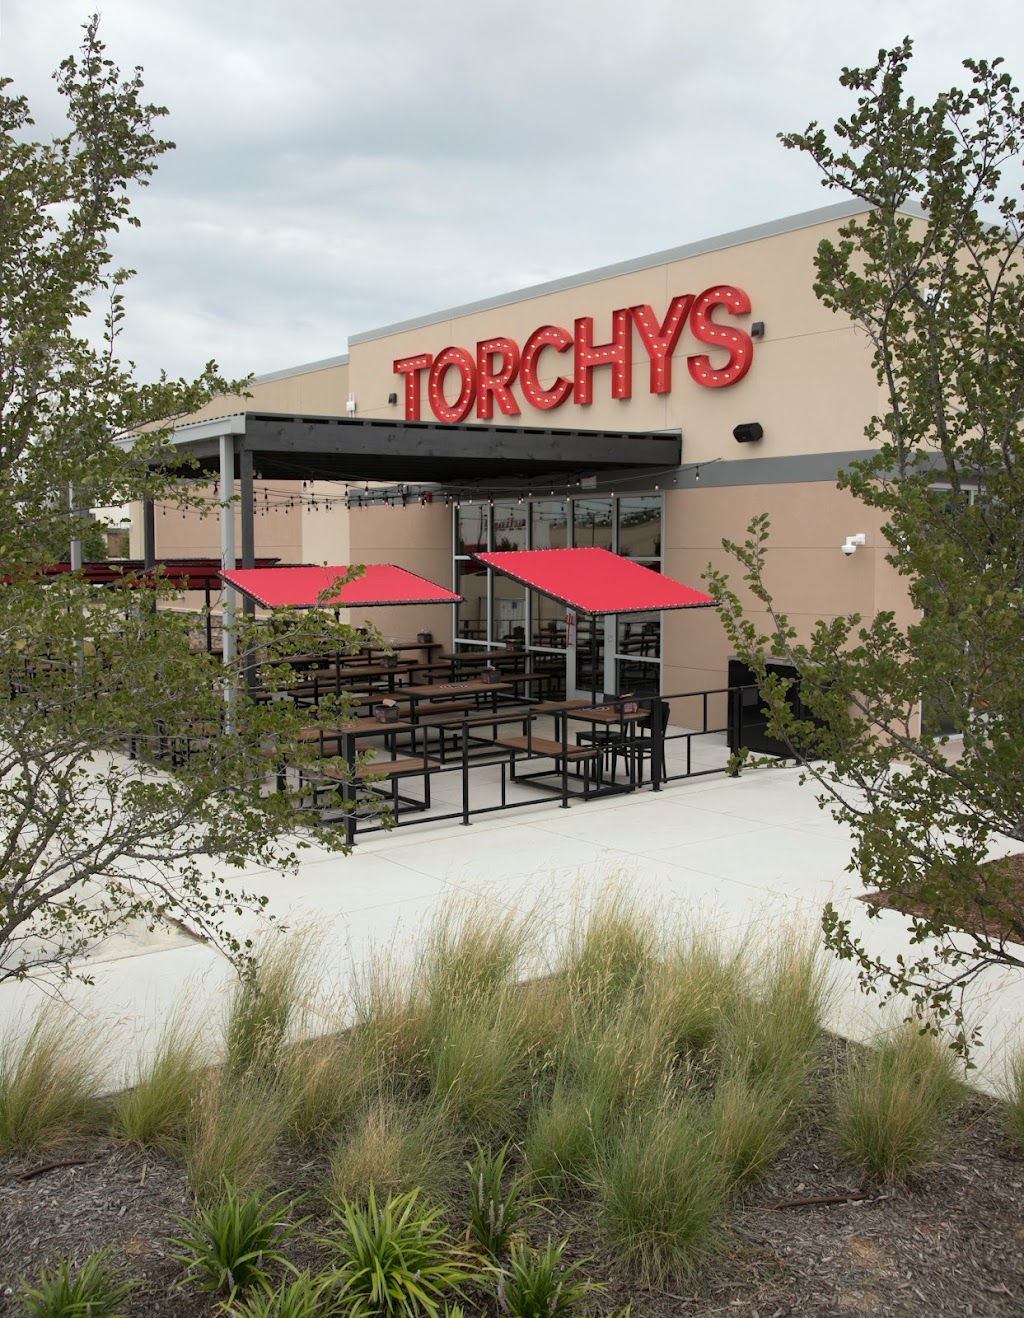 Torchys Tacos | 2501 State Hwy 121 Ste. 100, Euless, TX 76039 | Phone: (817) 677-0773